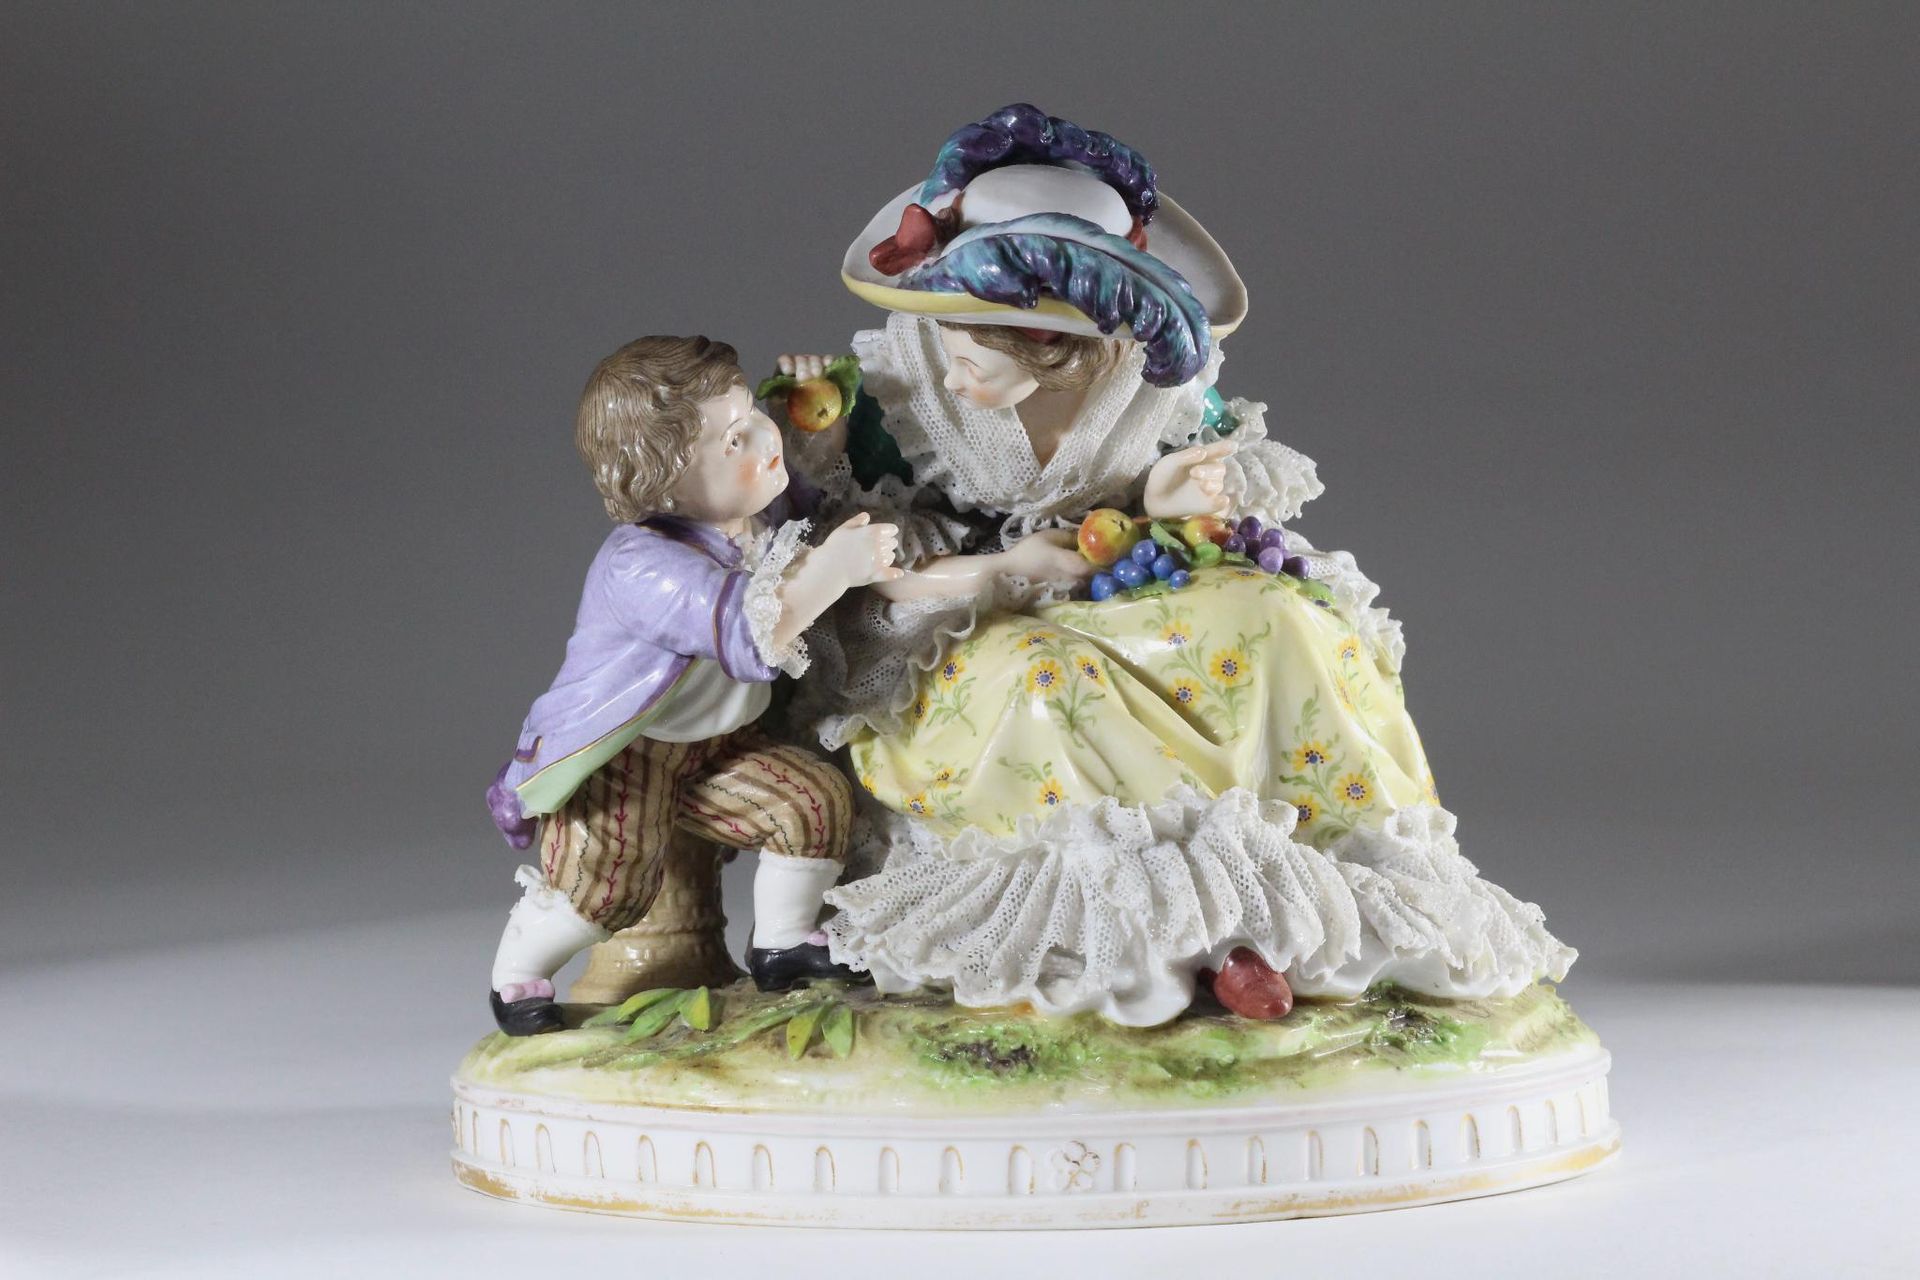 Null SAXE
Mother and son
Polychrome porcelain subject
Slightly missing 

Height:&hellip;